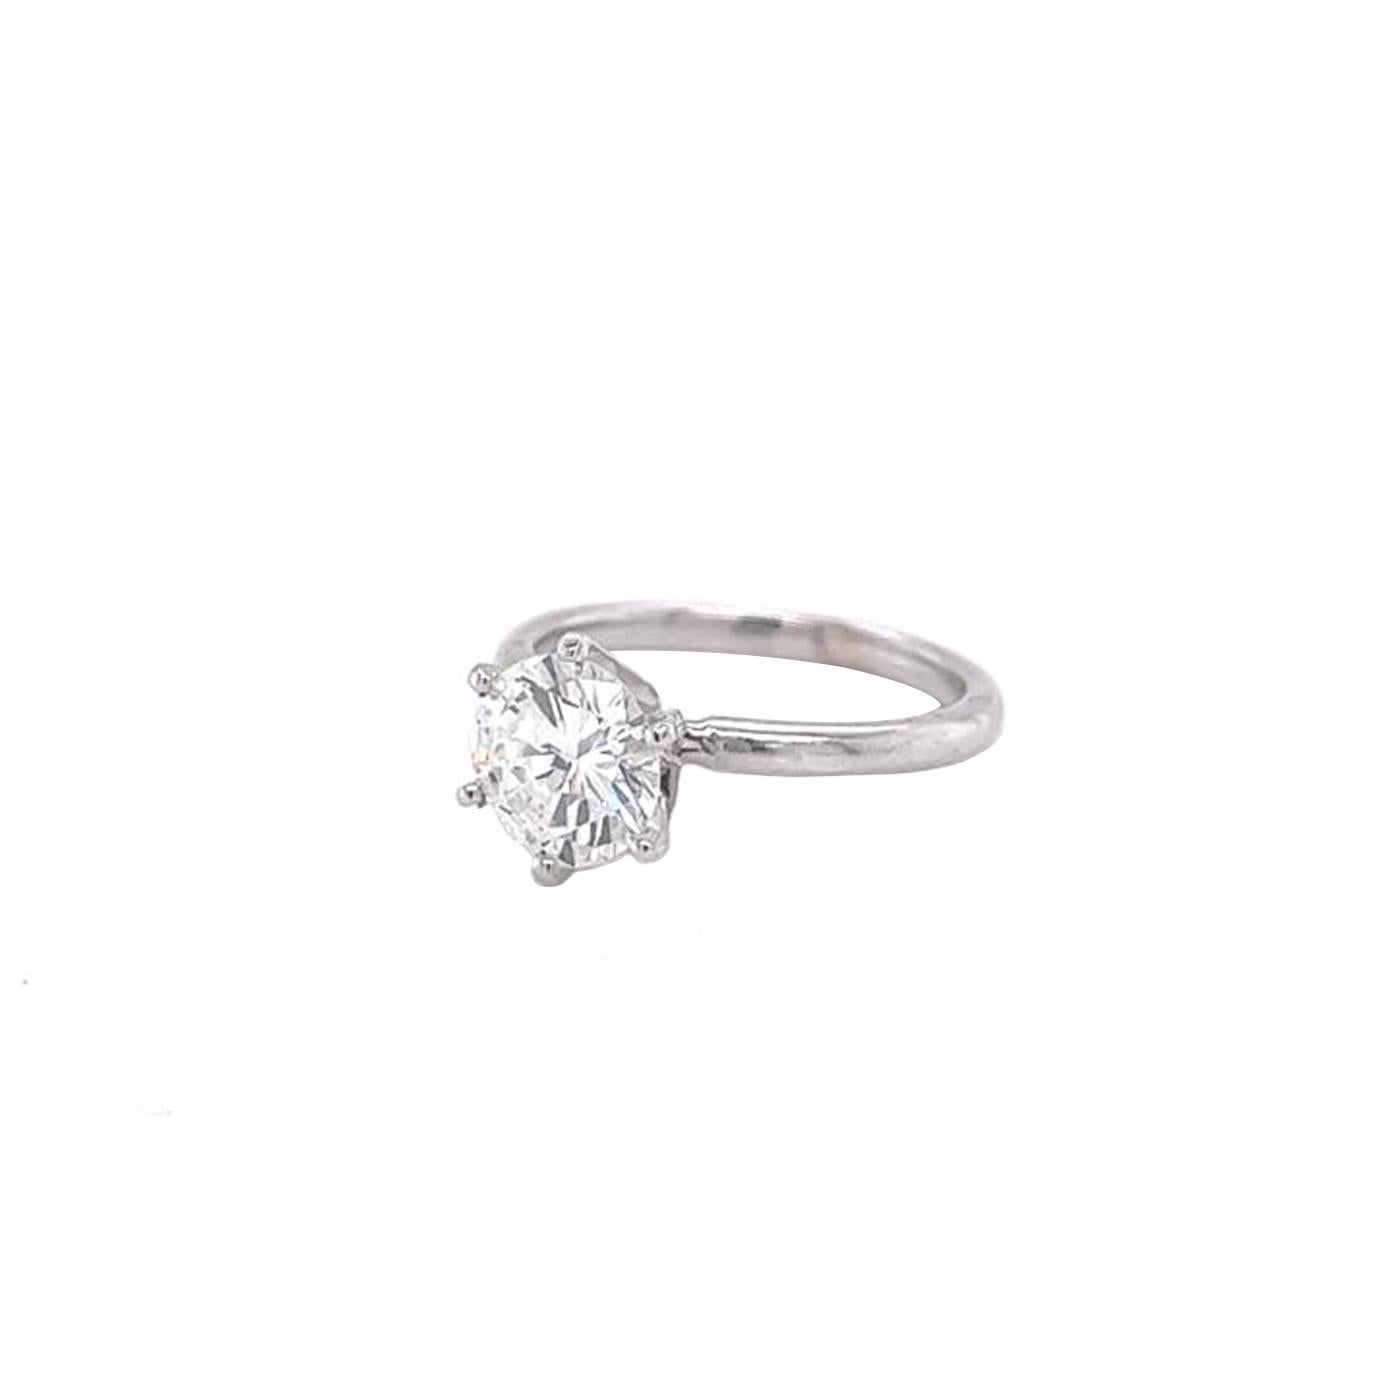 Moderniste GIA Certified 1.25ct Solitaire Diamond Ring 14k Gold VS1 Clarity Natural H Color en vente